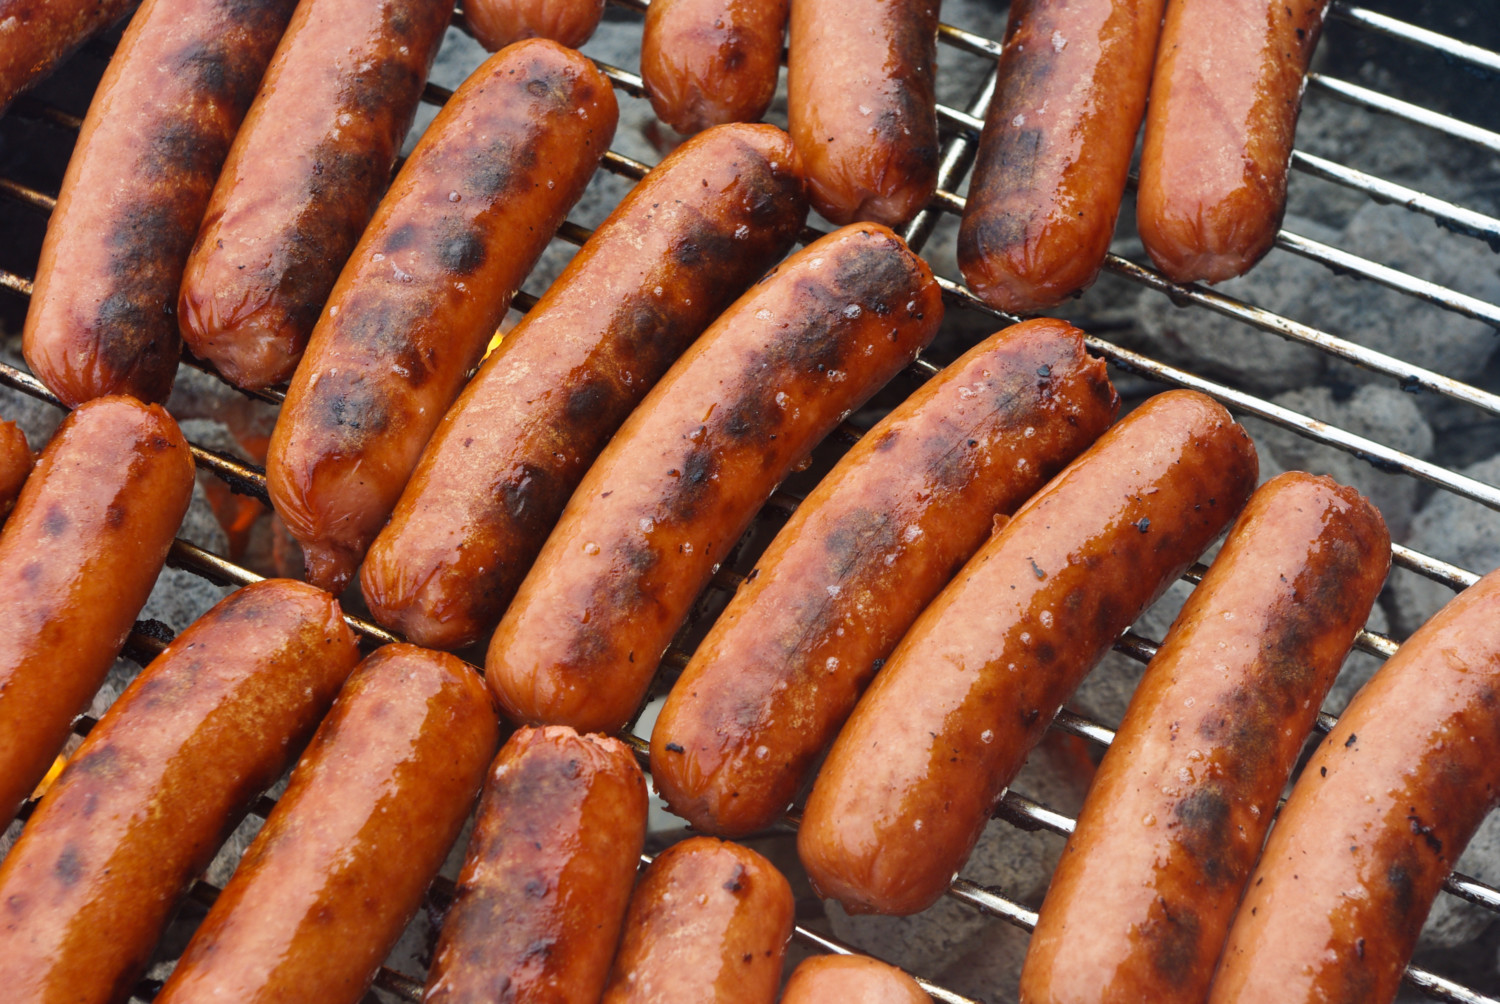 Why Hot Dogs And Buns Come In Different Quantities